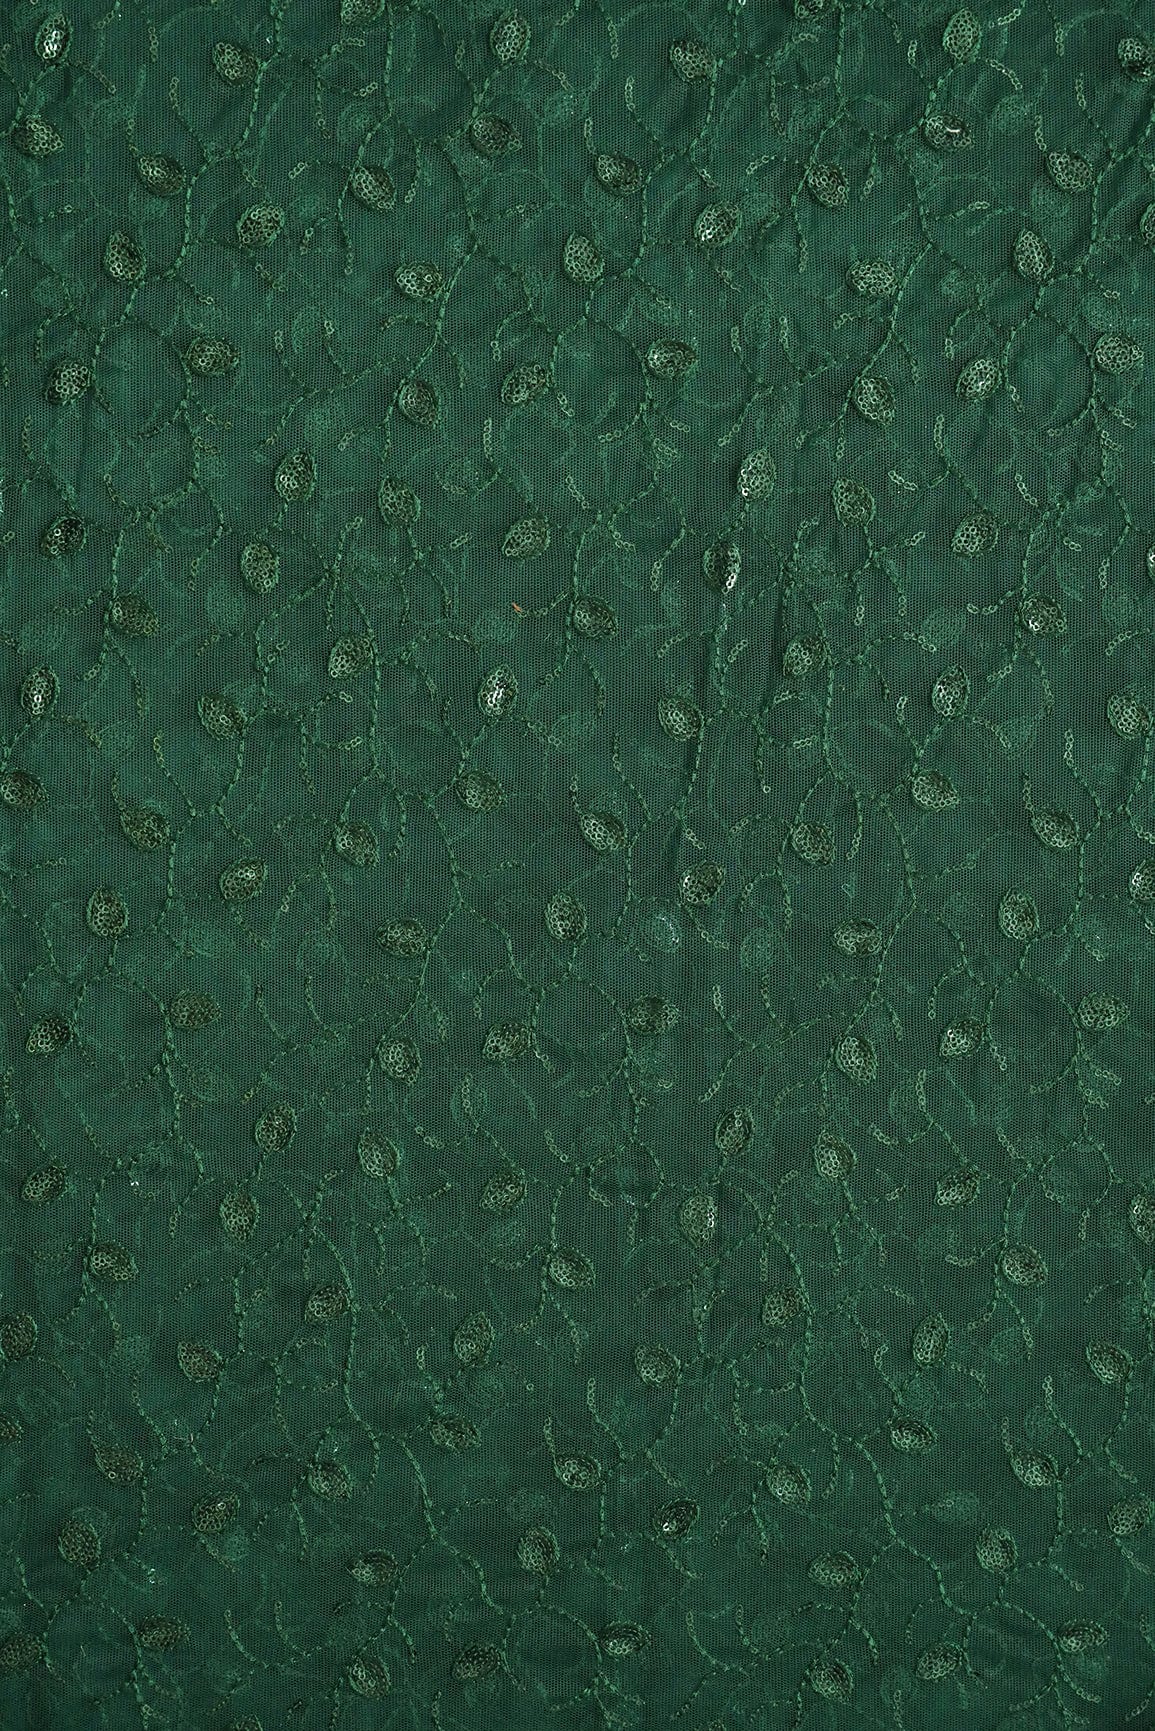 doeraa Embroidery Fabrics Green Sequins With Green Thread Leafy Embroidery Work On Bottle Green Soft Net Fabric